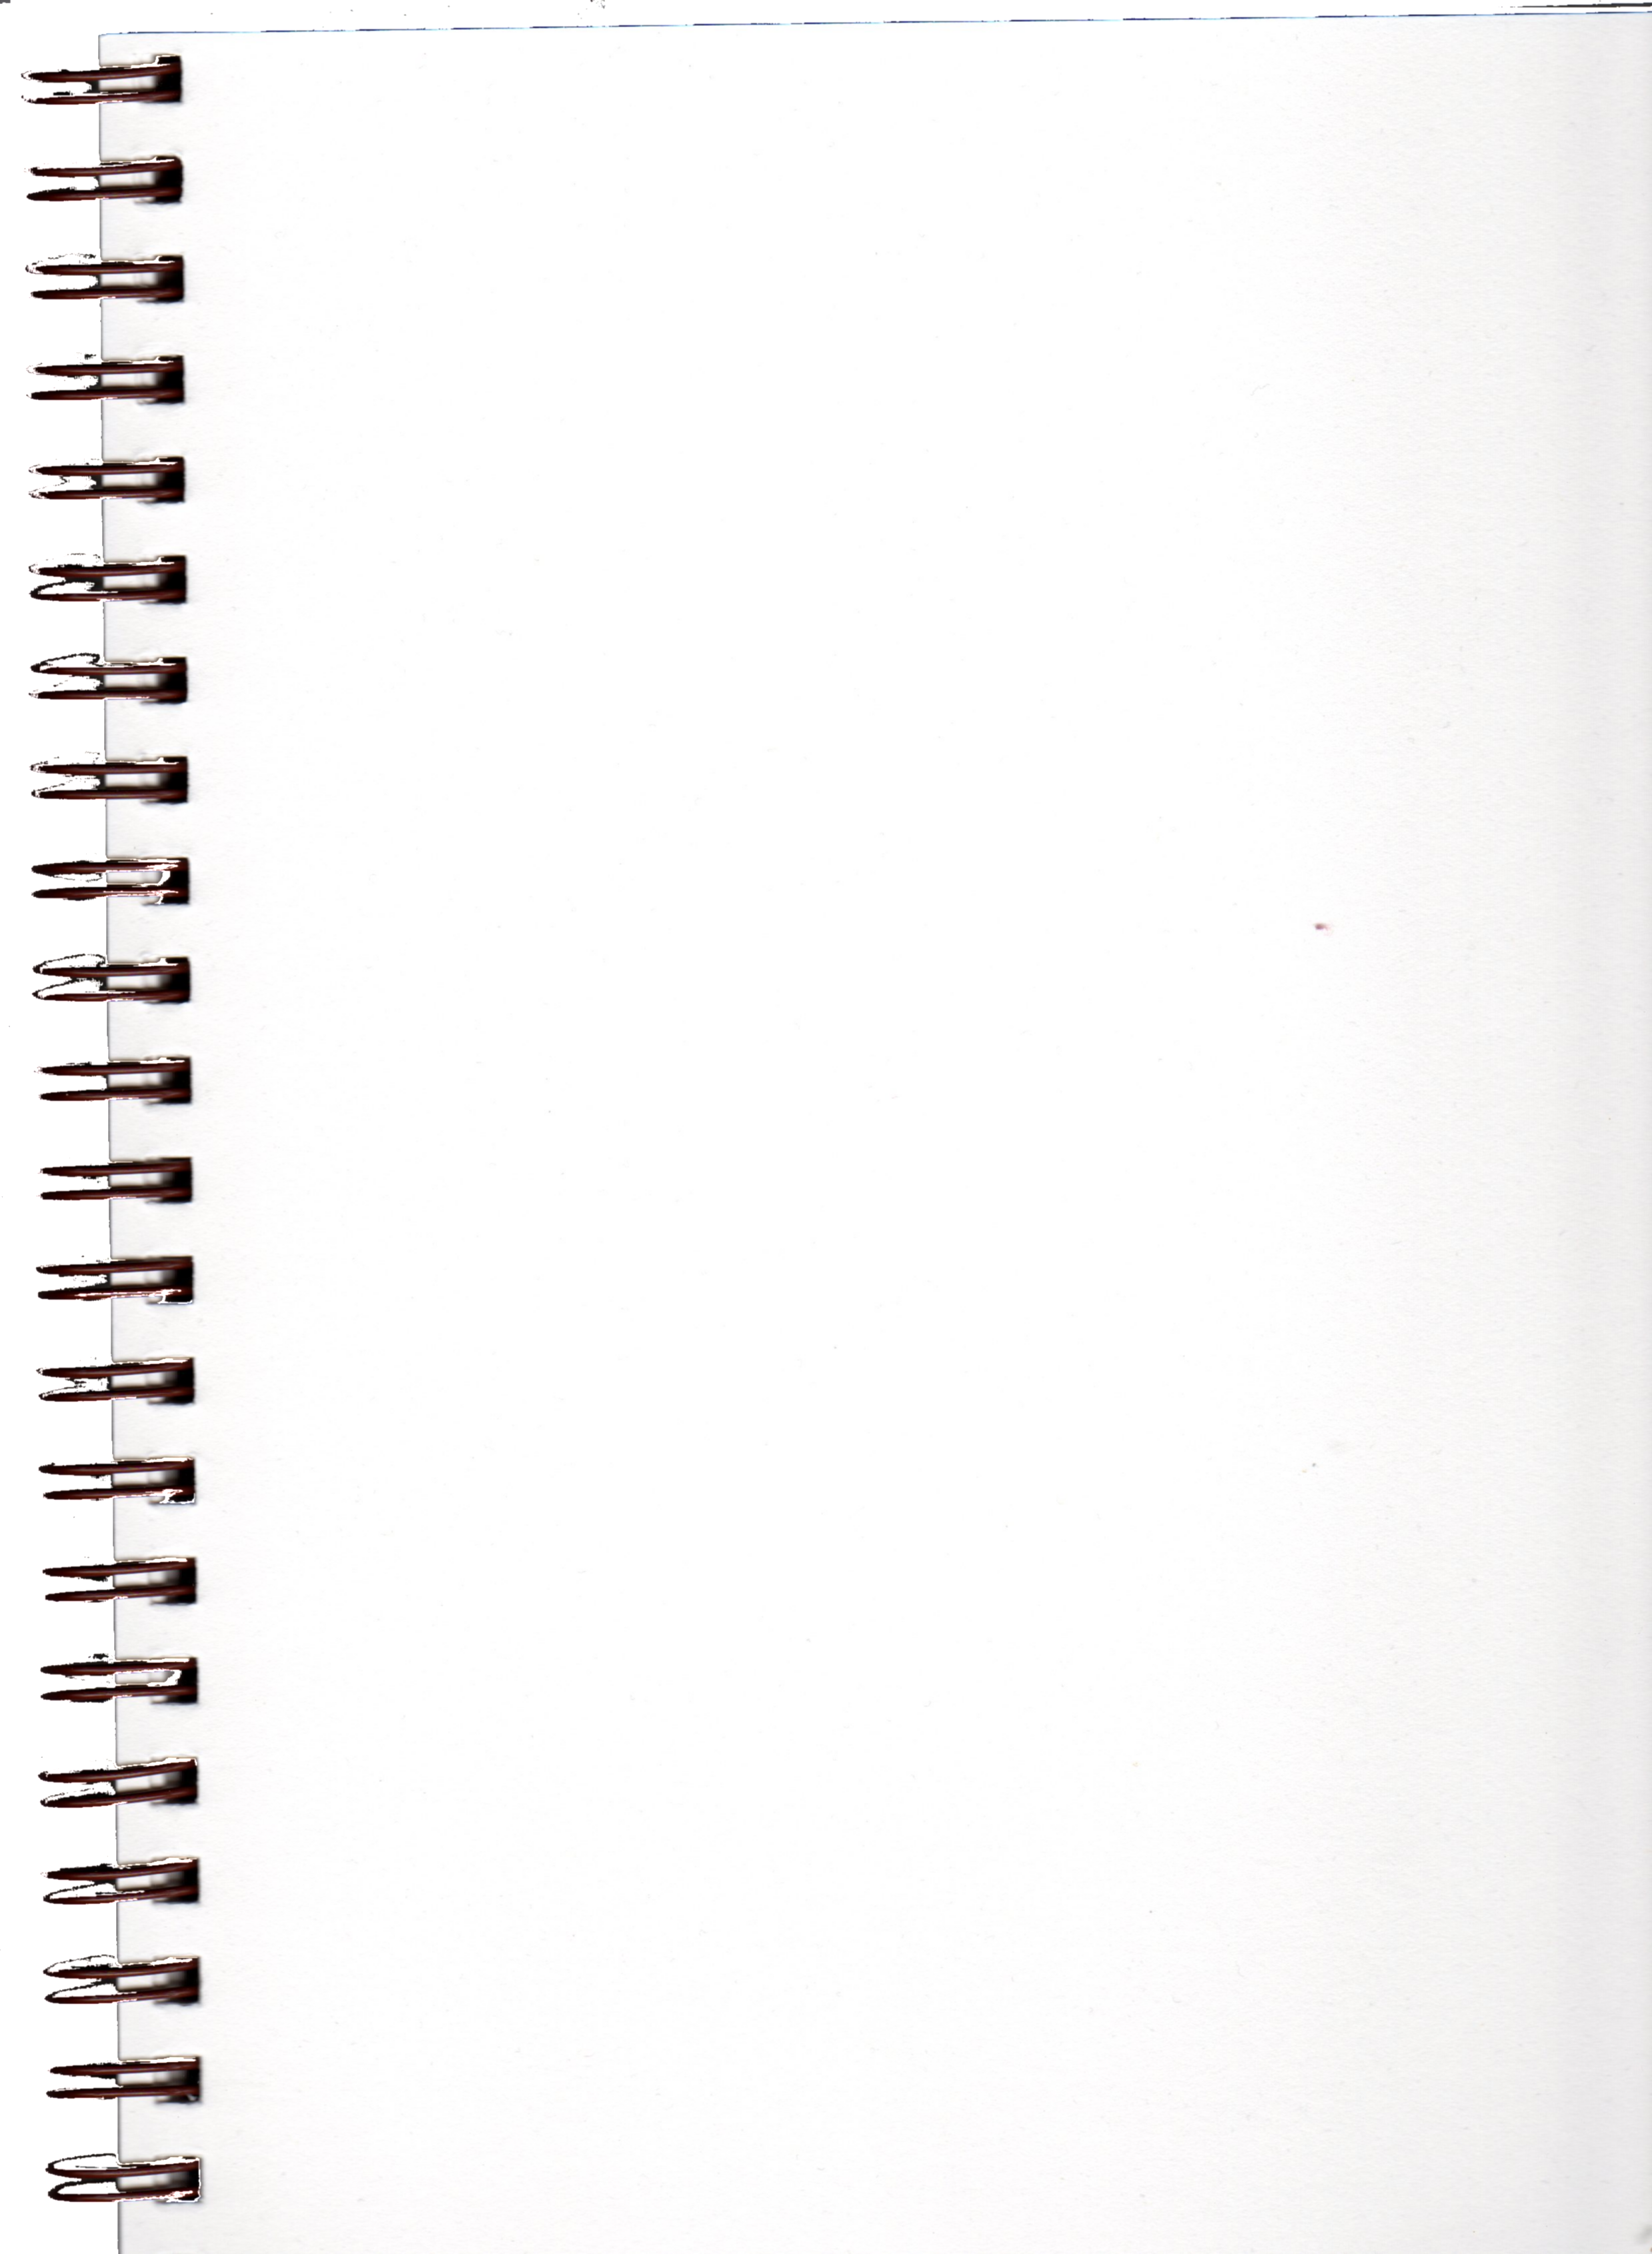 Blank parchment page o1 Spiral Notebook